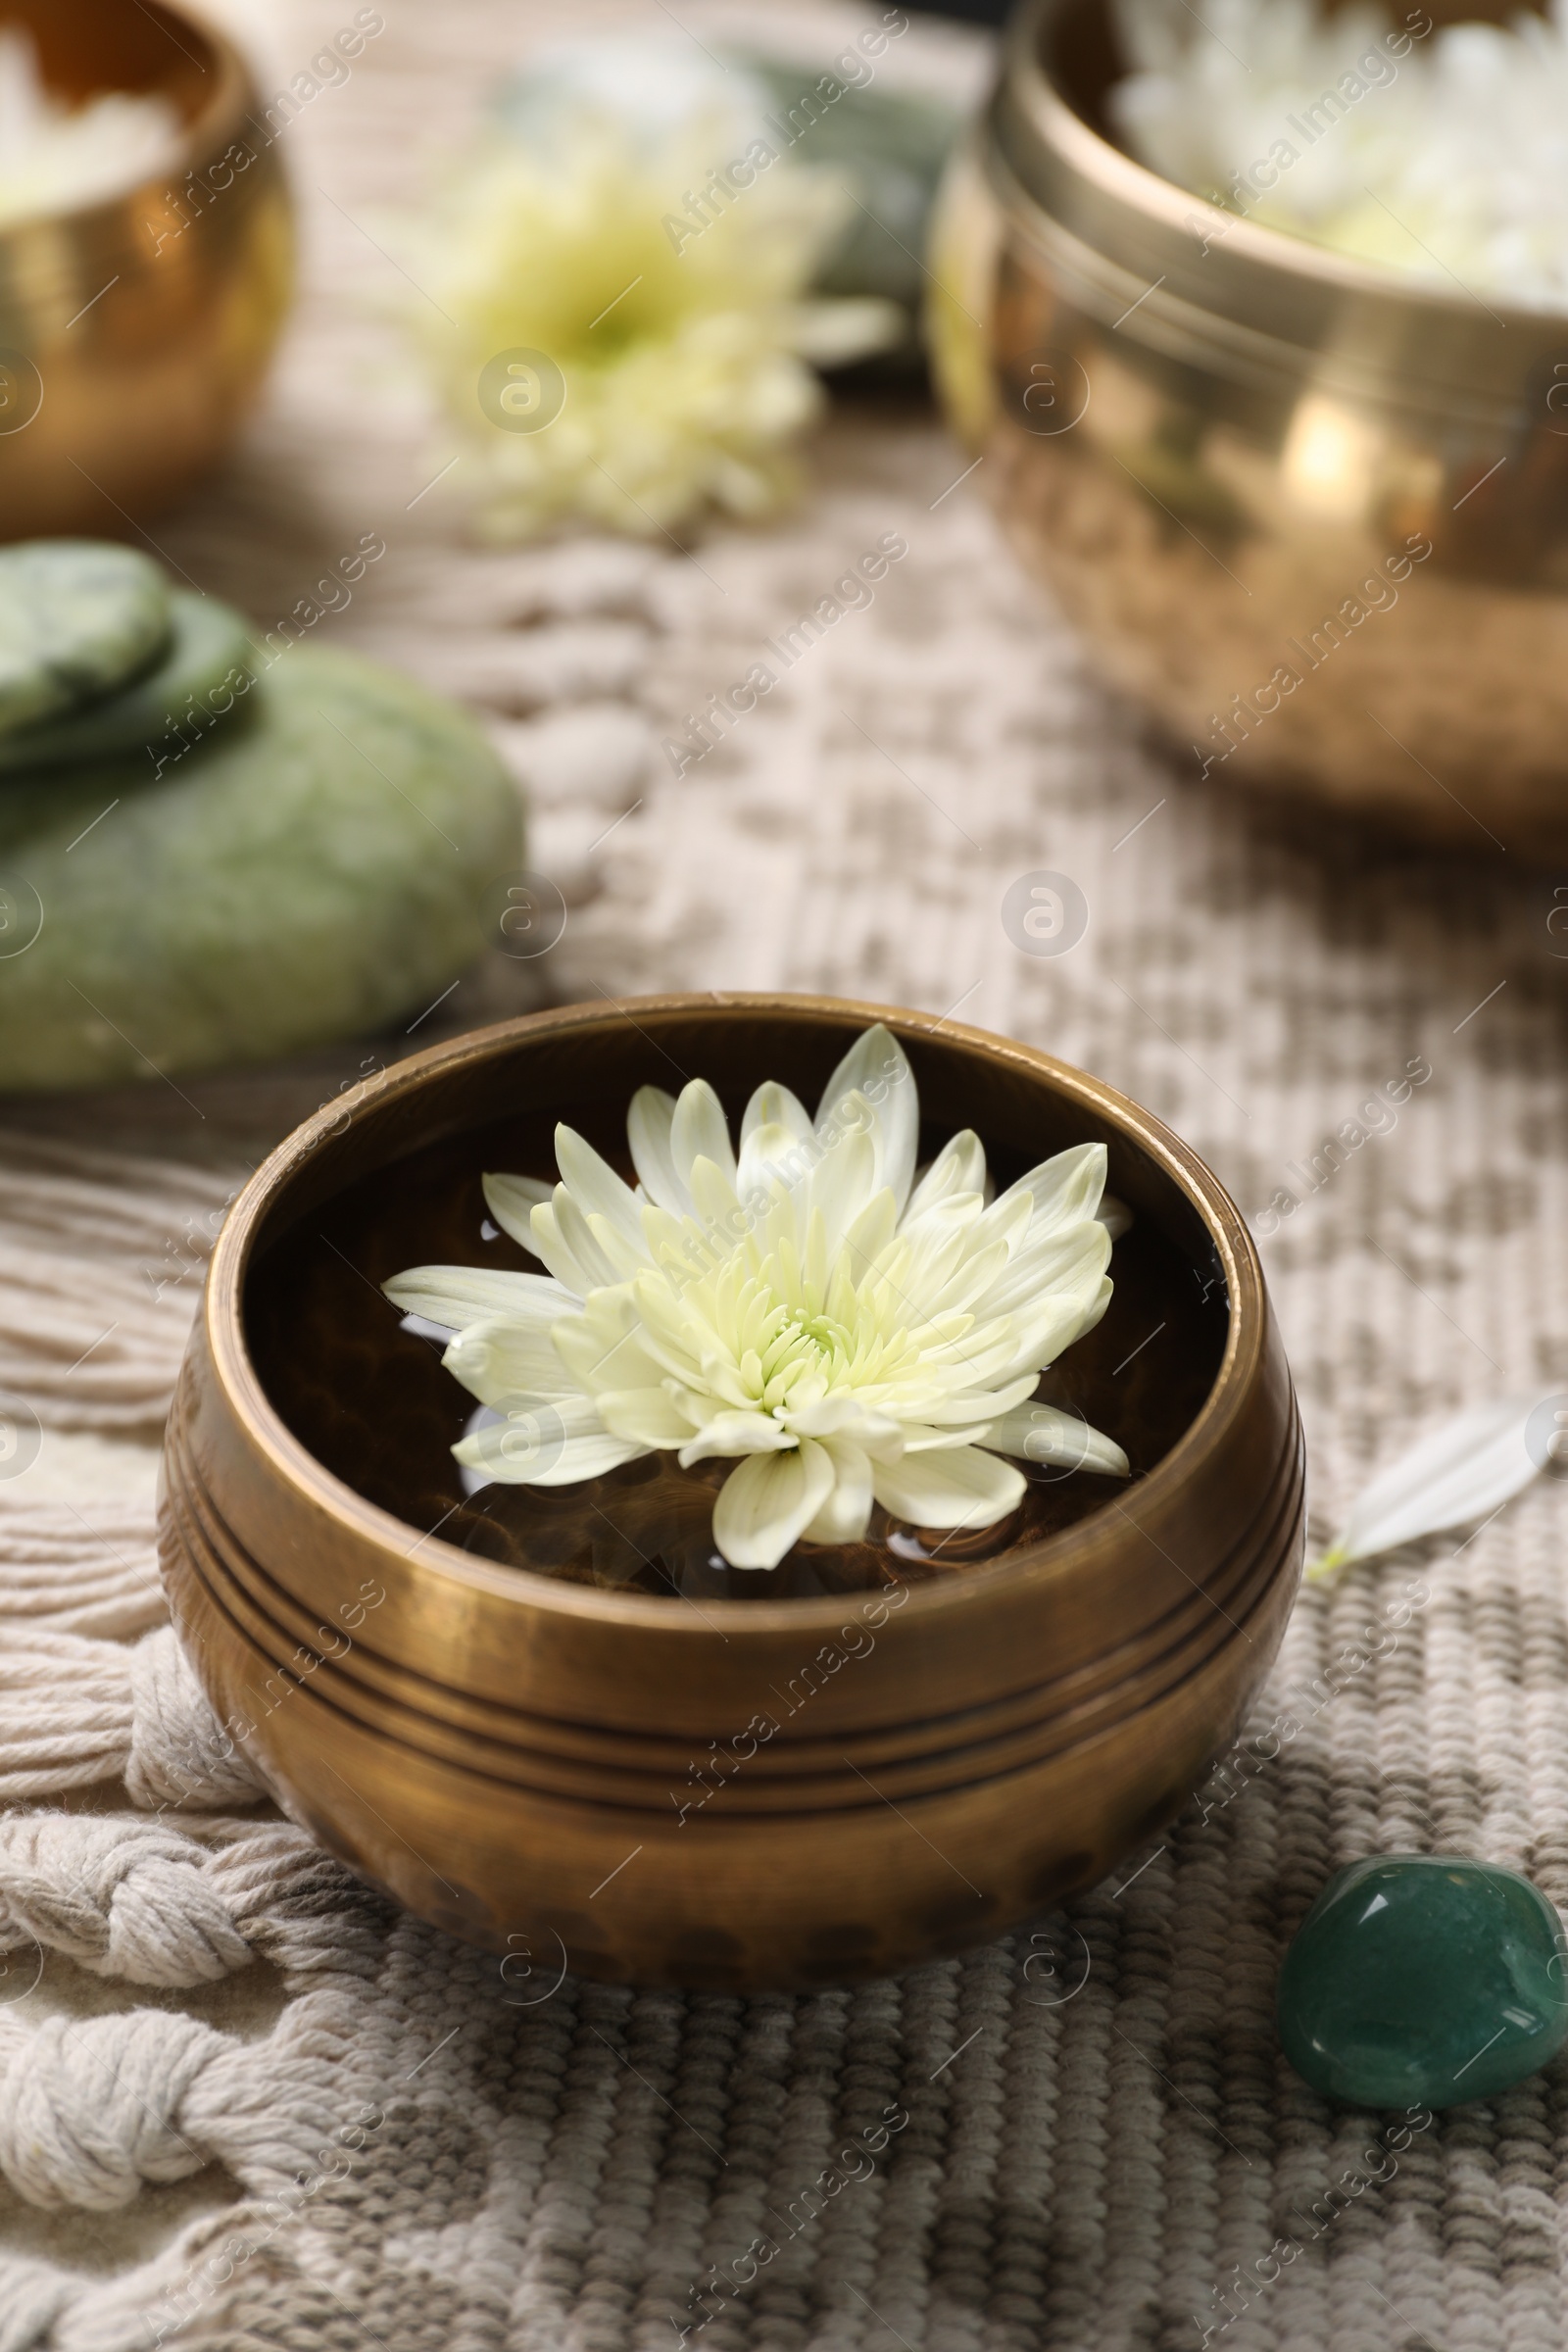 Photo of Tibetan singing bowl with water, beautiful chrysanthemum flower and stones on table